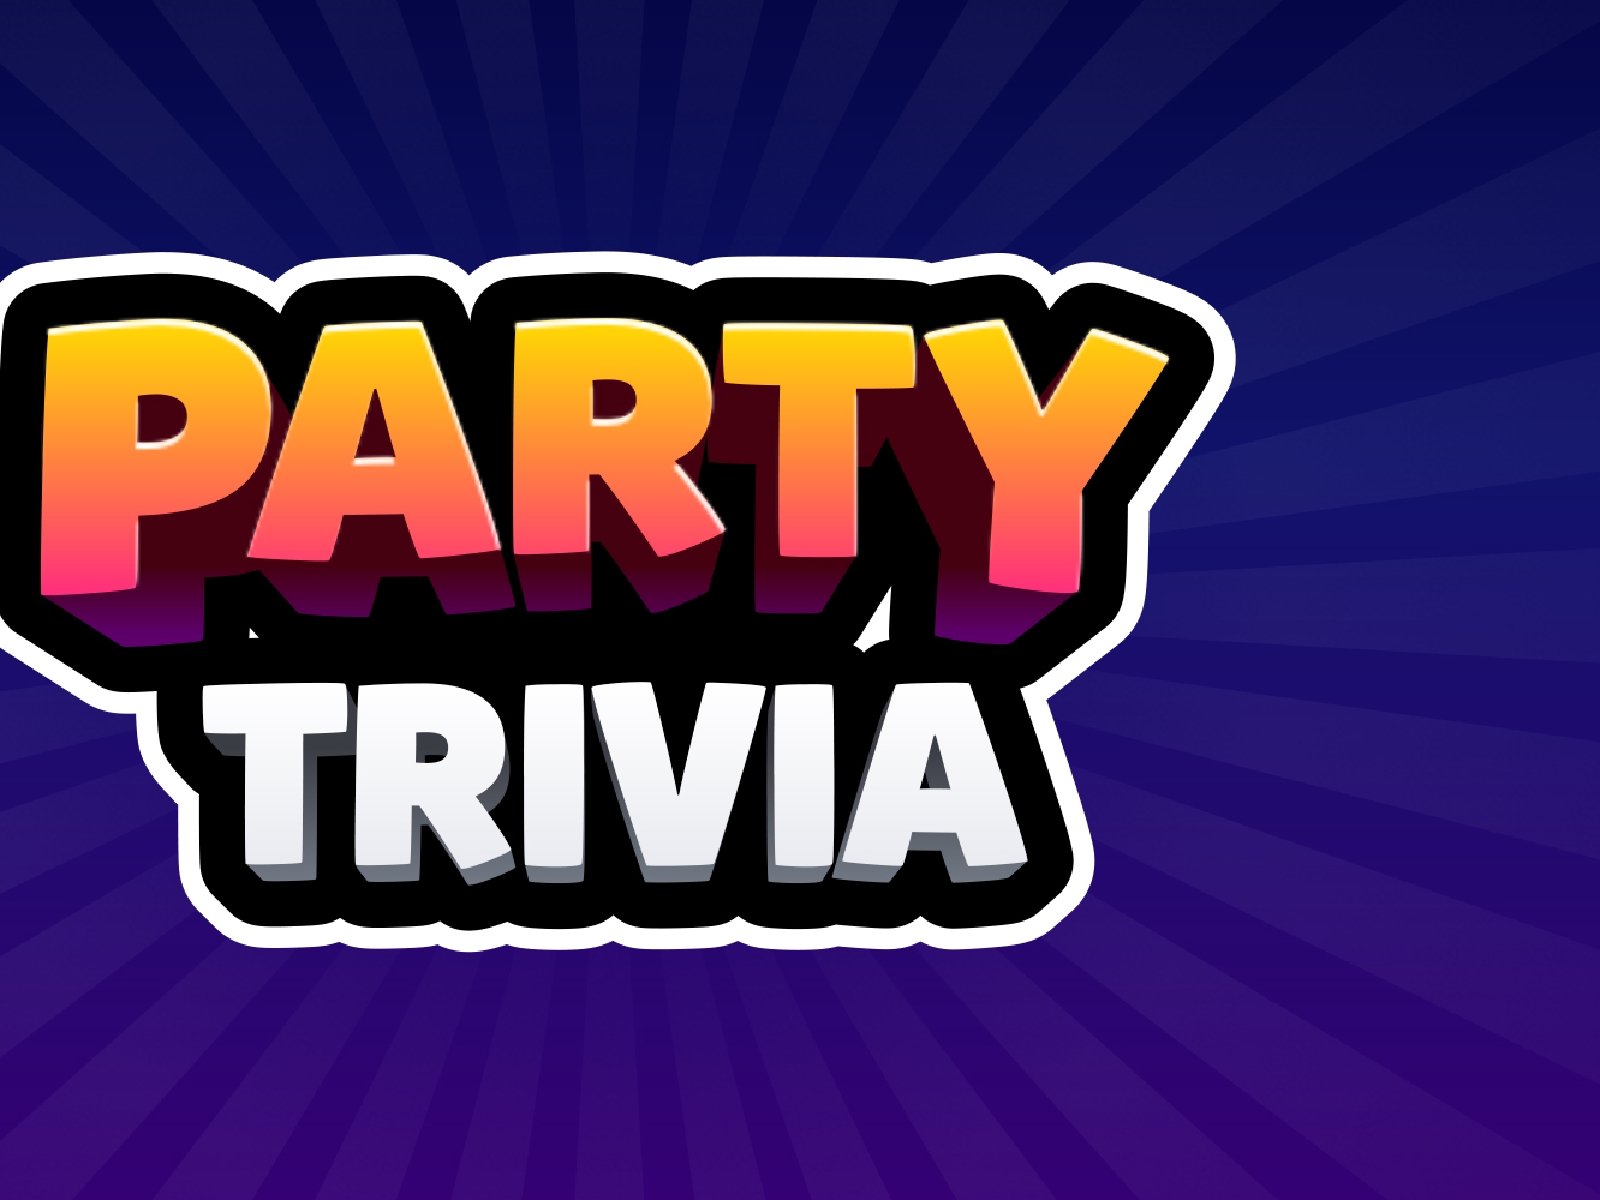 100+ Hilarious Trivia Questions To Get The Party Started